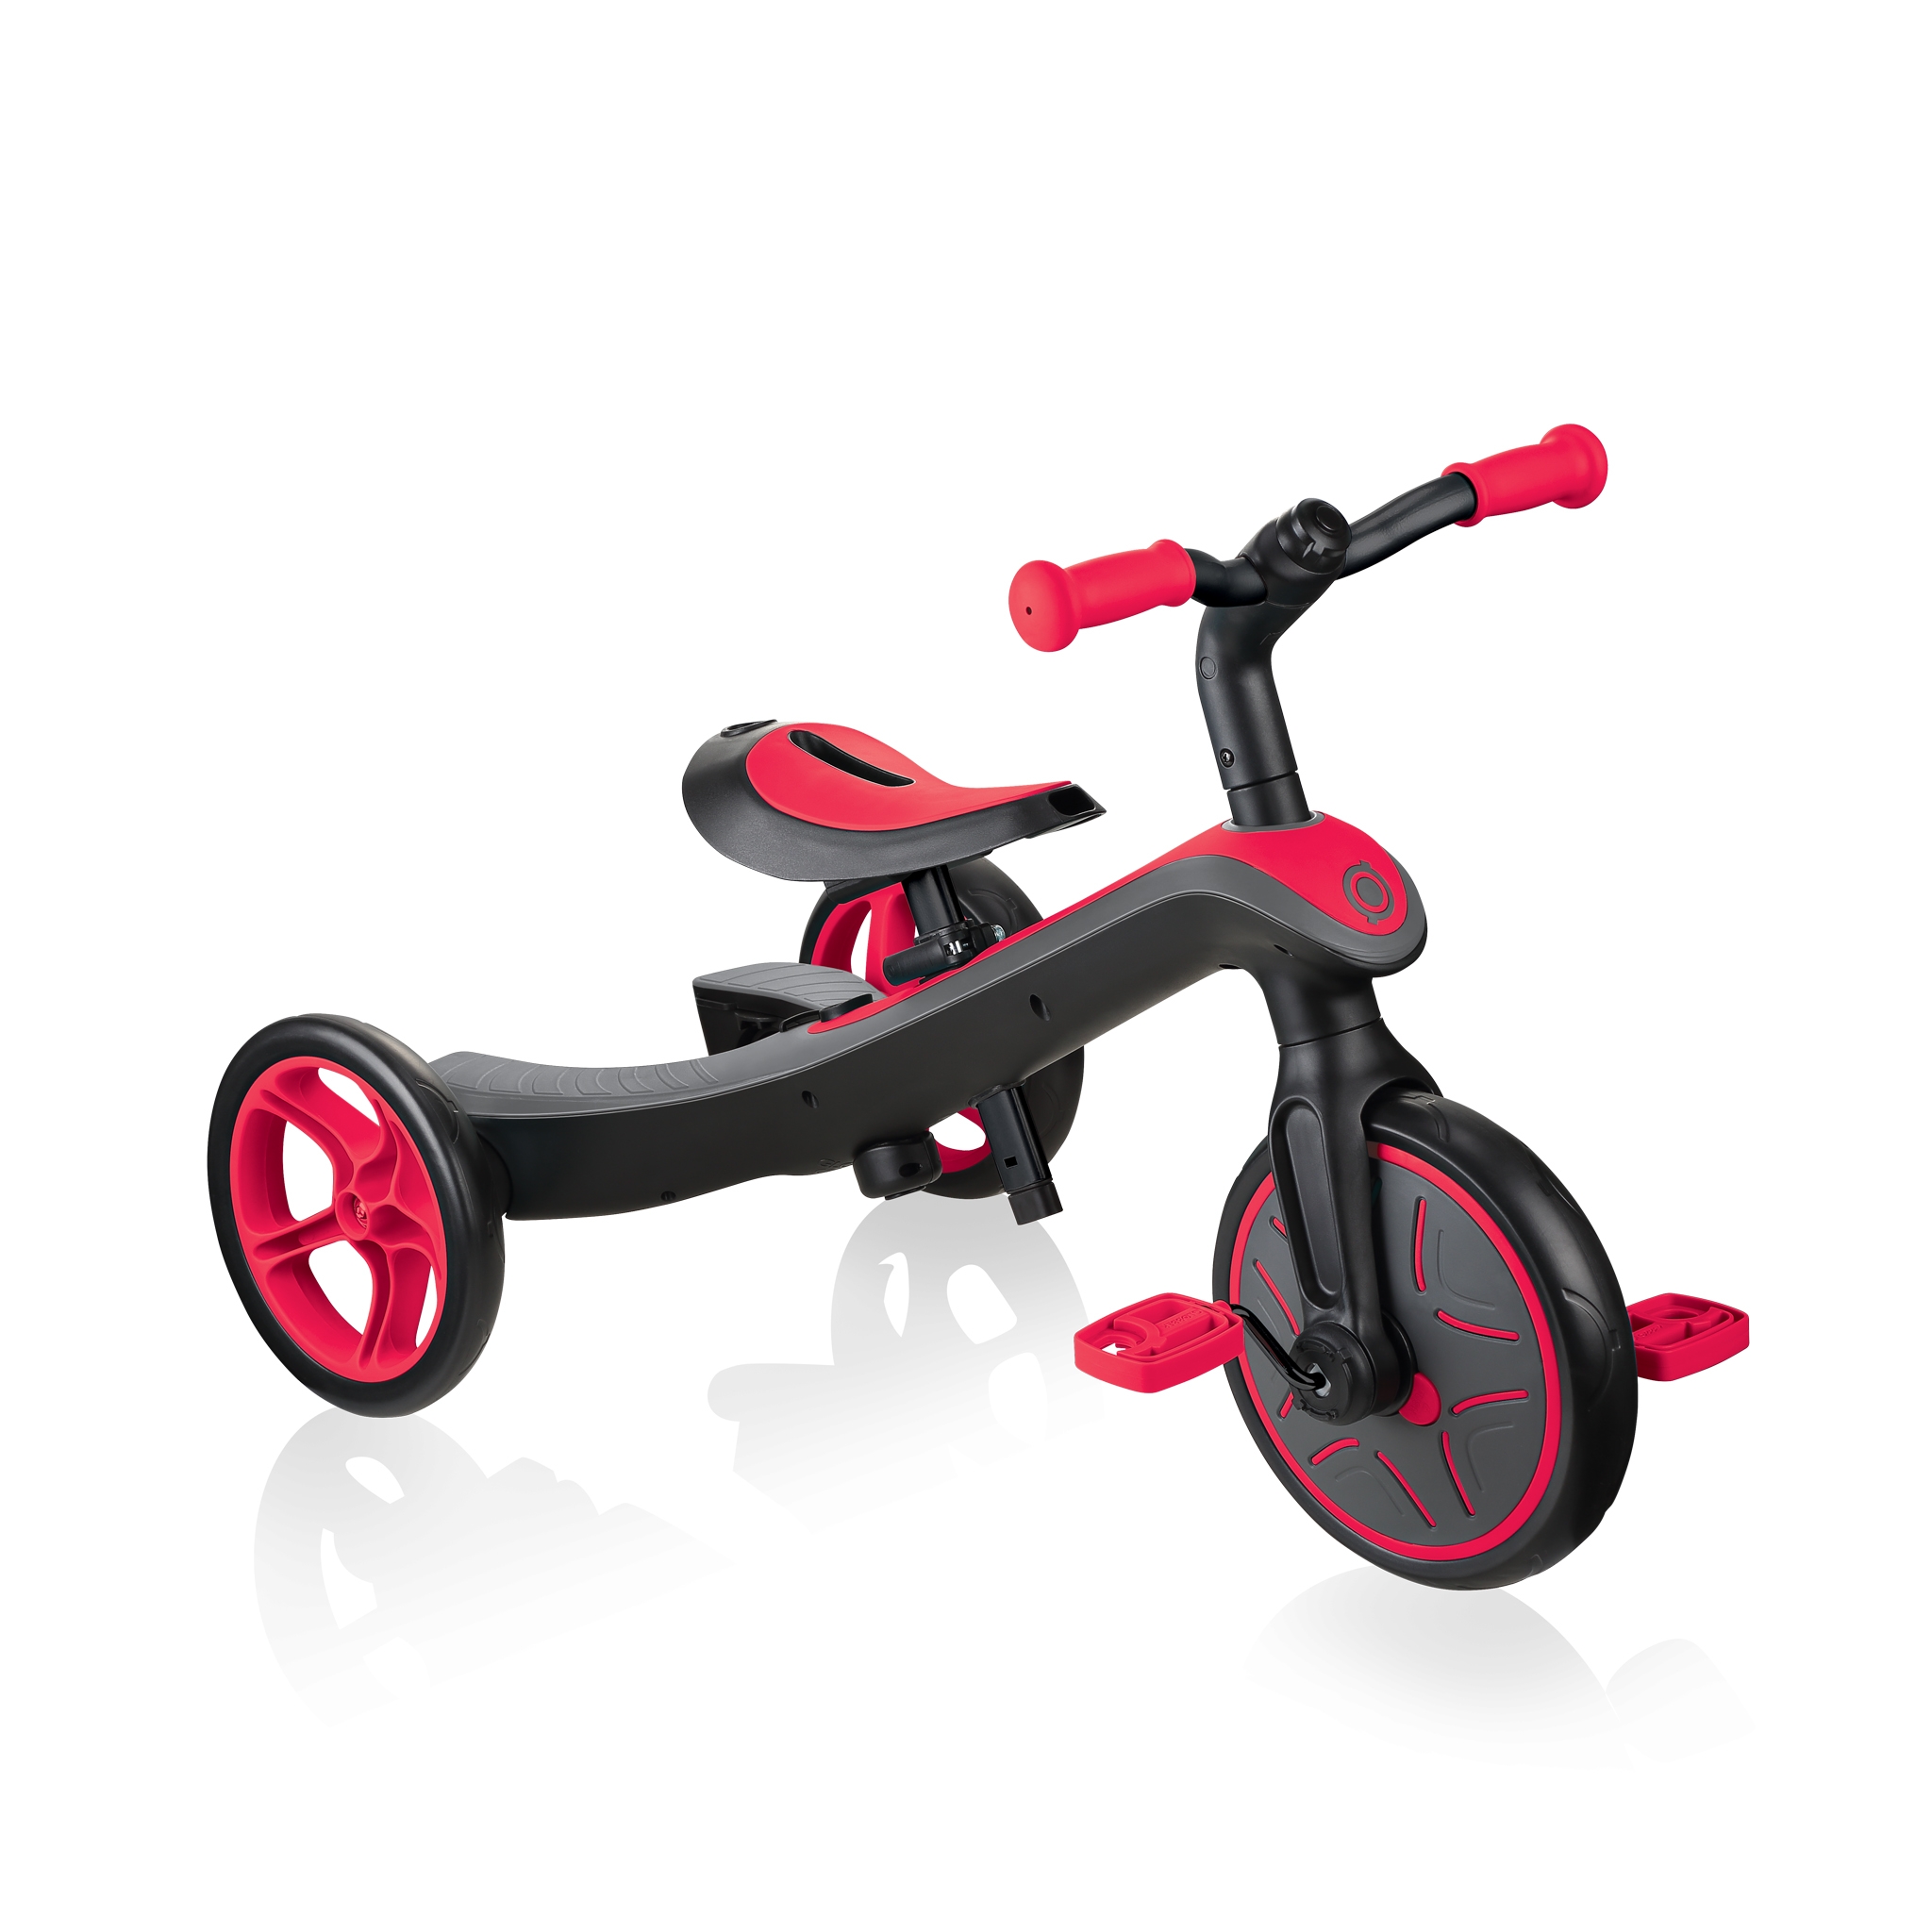 Globber-EXPLORER-TRIKE-2in1-all-in-one-training-tricycle-and-kids-balance-bike-stage1-training-trike_new-red 0